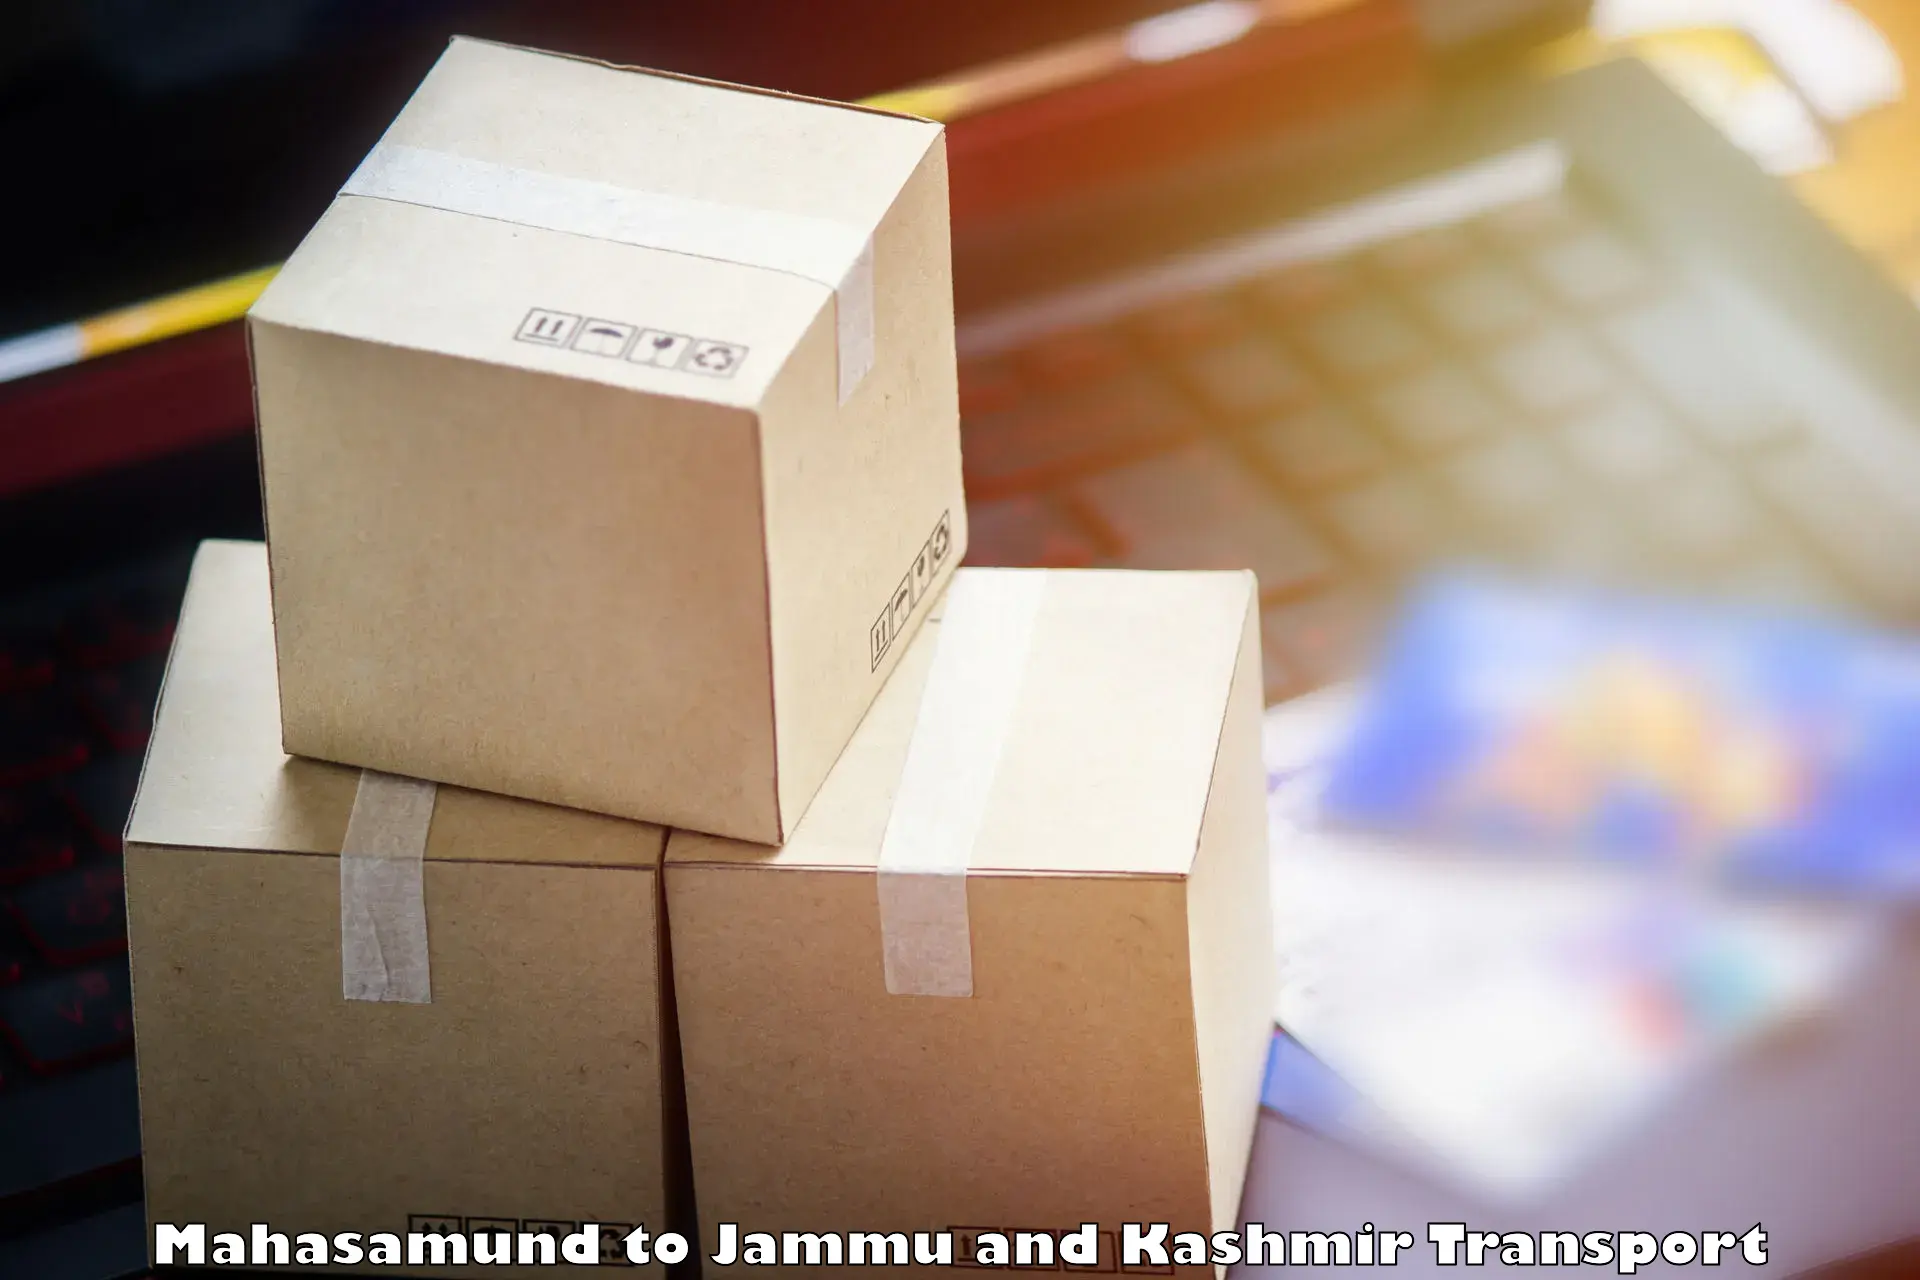 Package delivery services Mahasamund to Baramulla